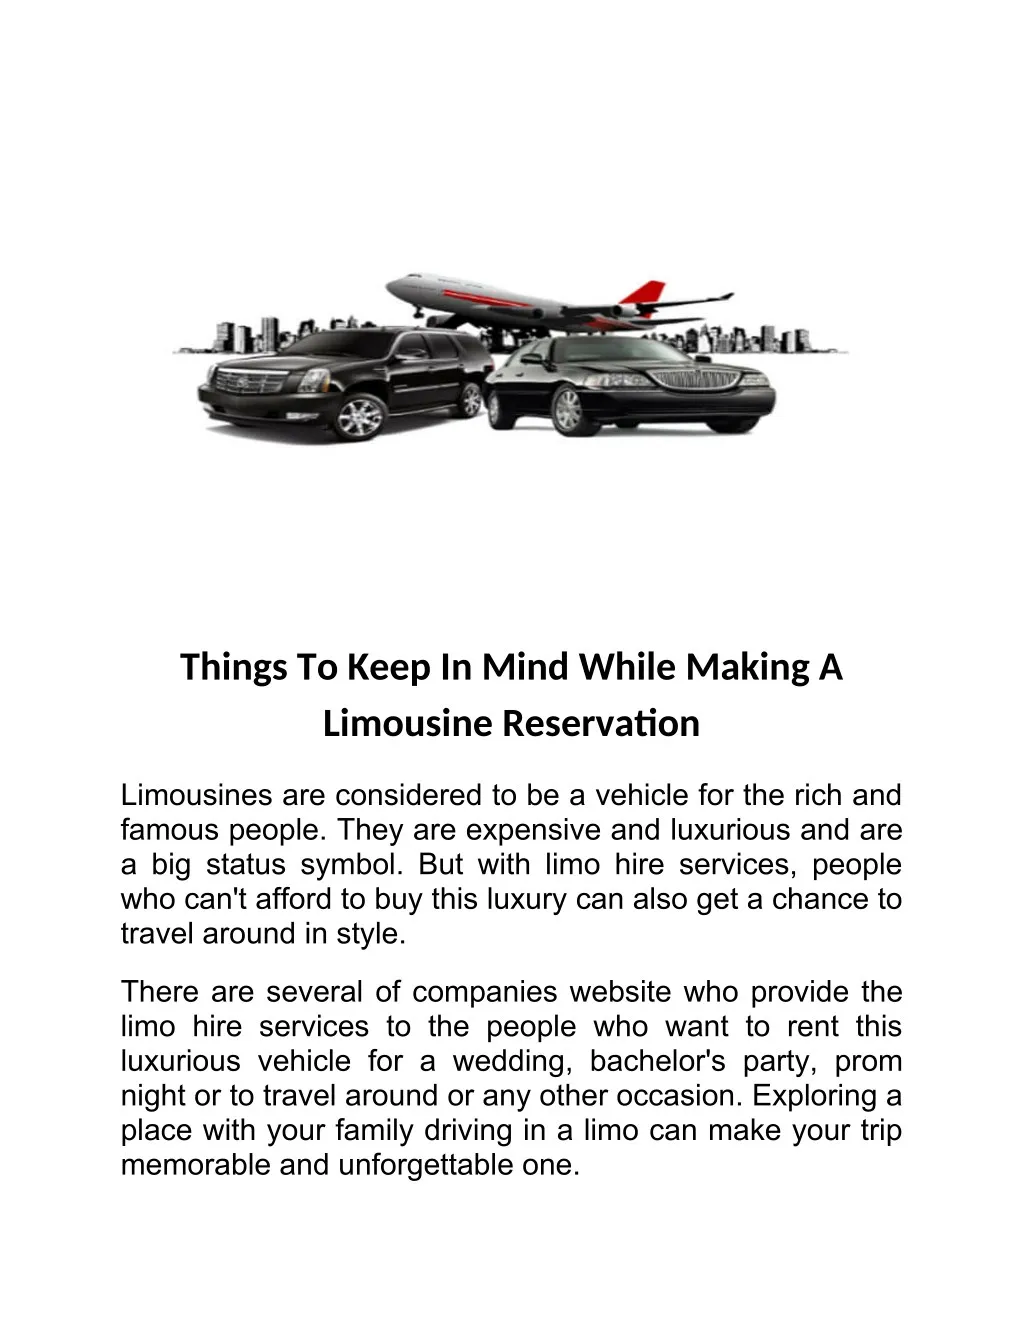 things to keep in mind while making a limousine